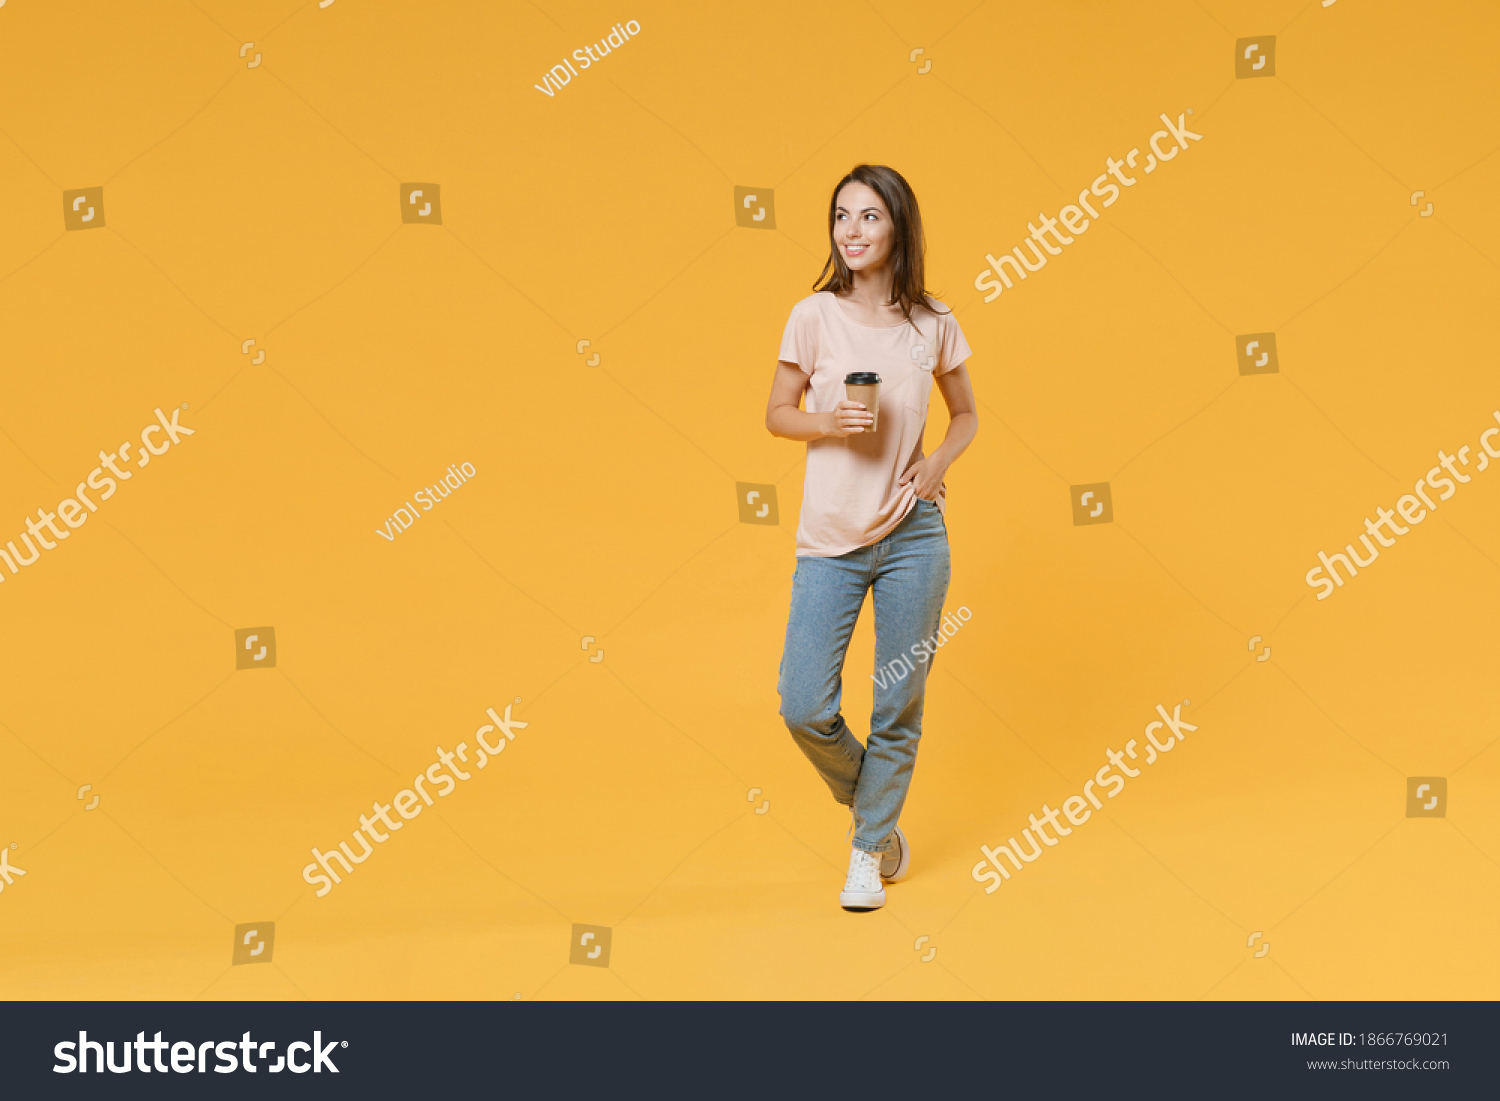 Full length portrait of smiling young brunette woman 20s wearing pastel pink casual t-shirt posing hold paper cup of coffee or tea looking aside isolated on bright yellow color wall background studio #1866769021